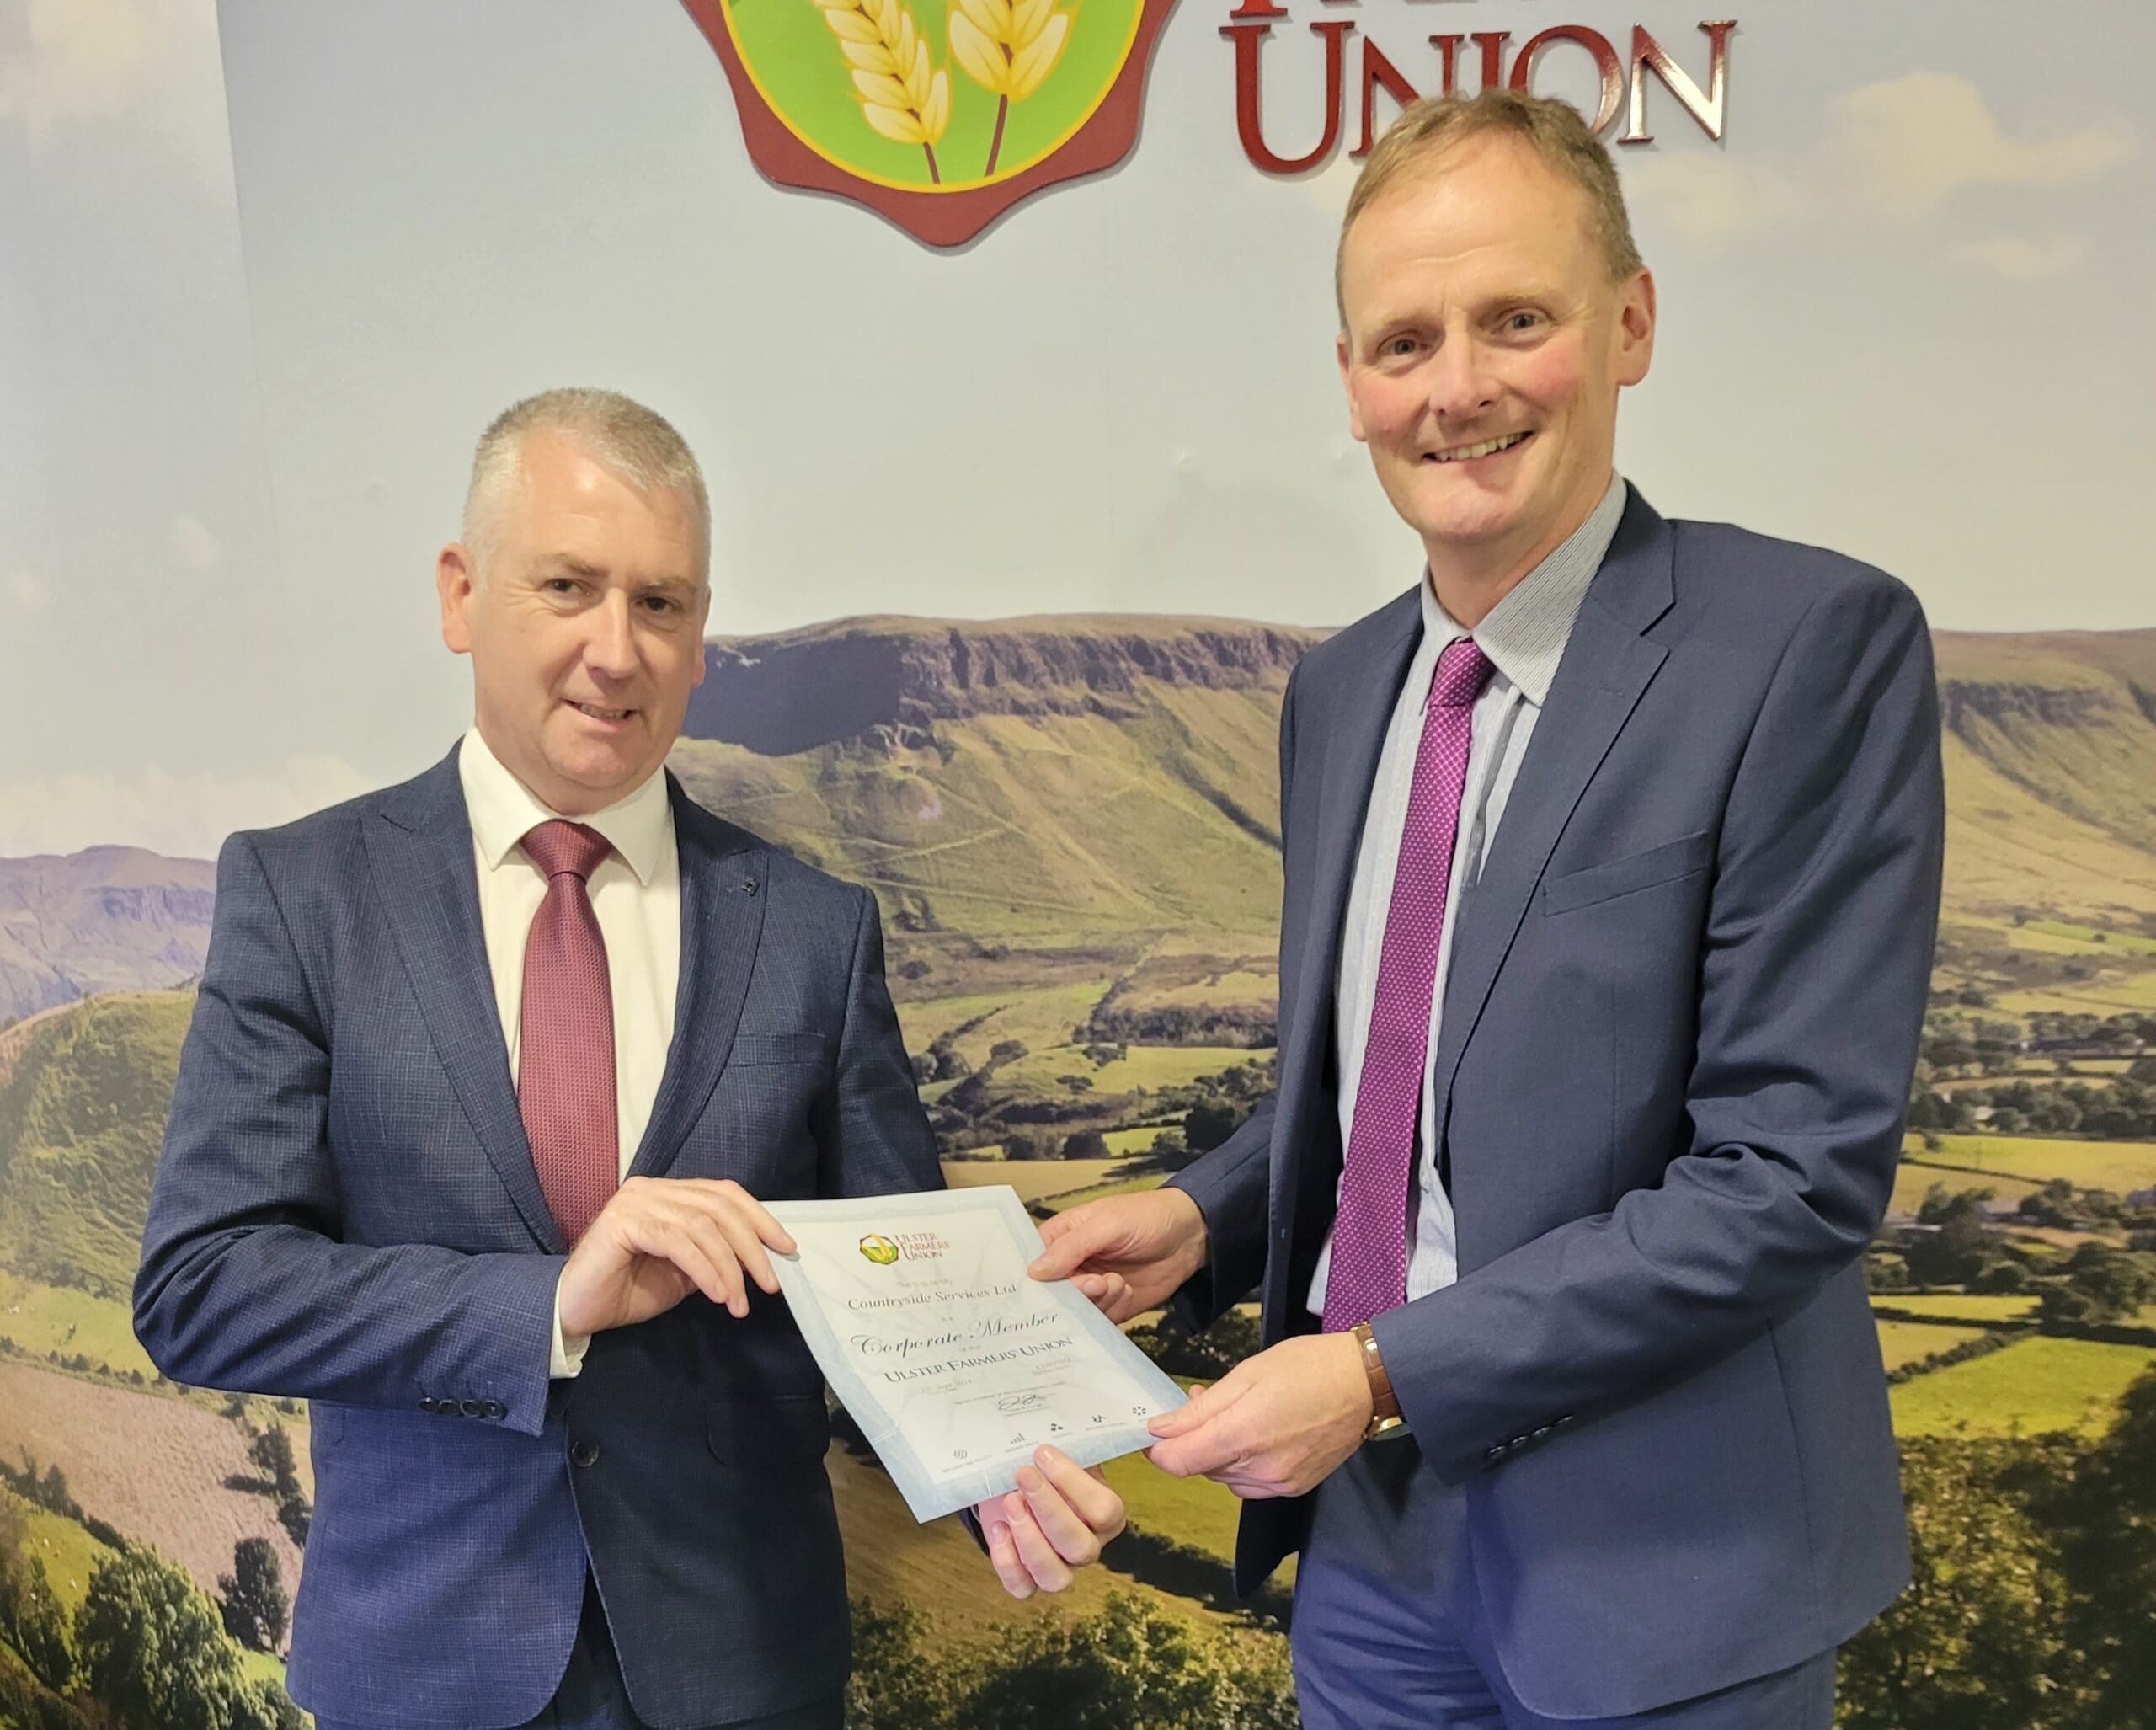 Countryside Services Ltd managing director Conall Donnelly and UFU president David Brown.